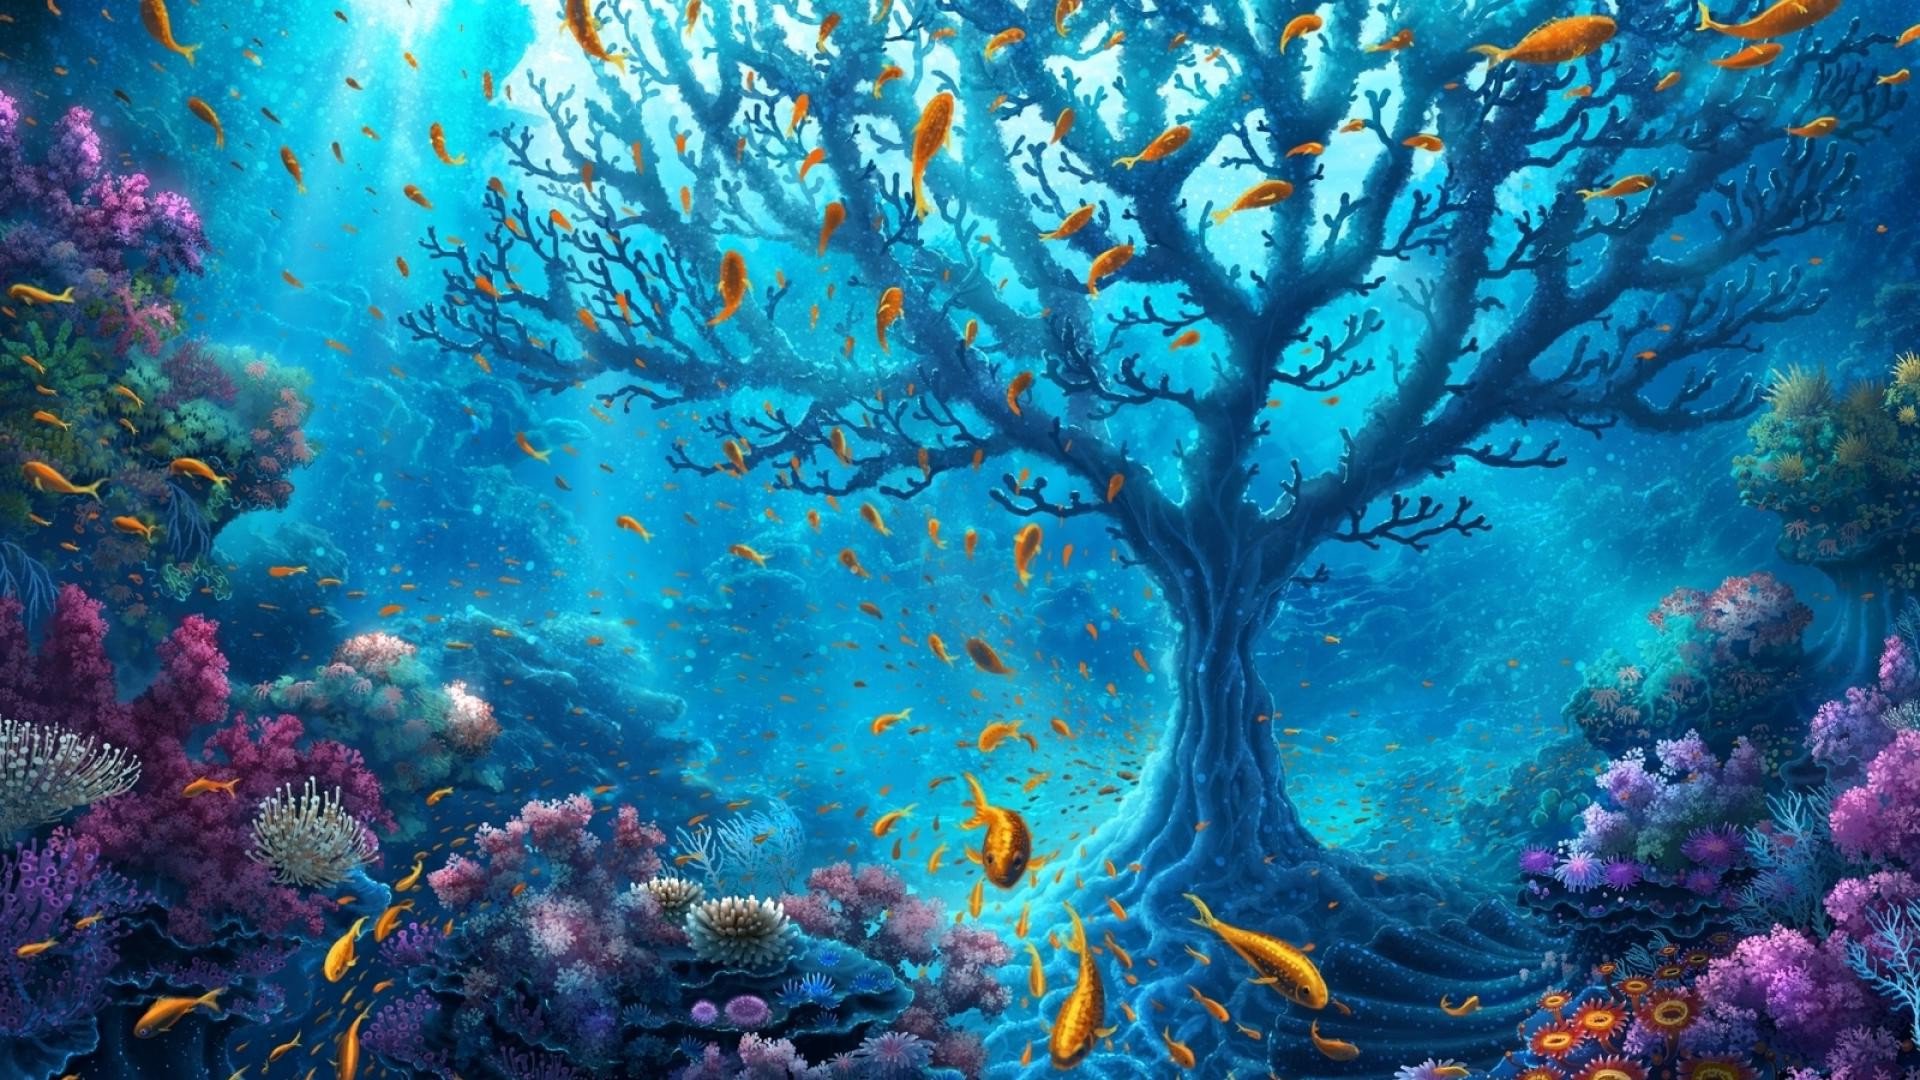 Underwater Wallpapers and Background Images - stmed.net